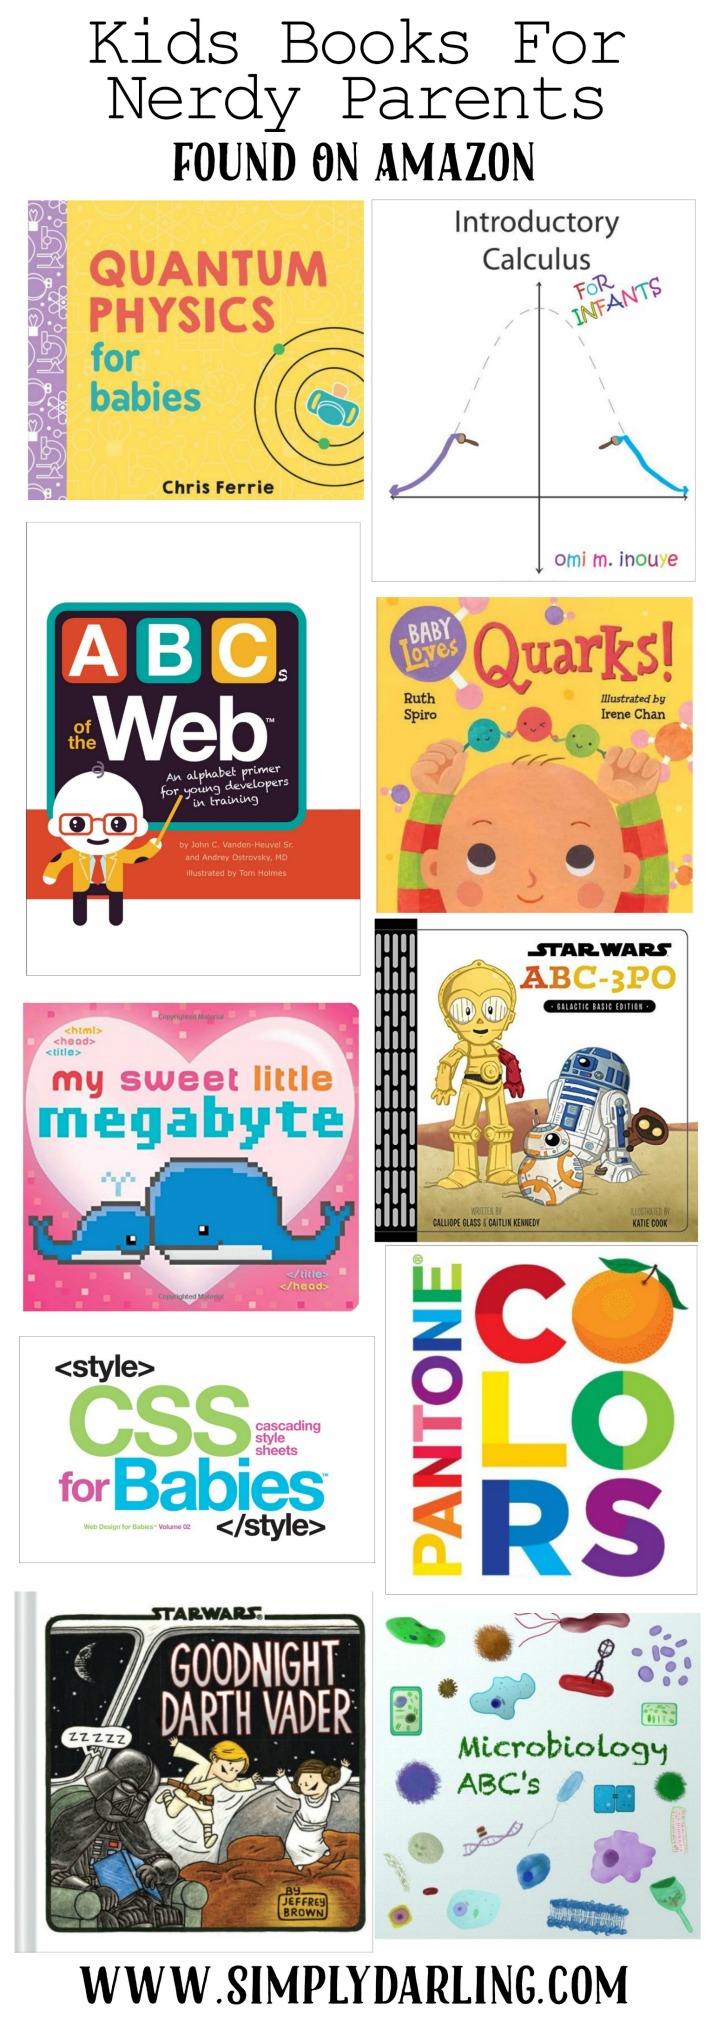 Kids Books For Nerdy Parents - Found On Amazon